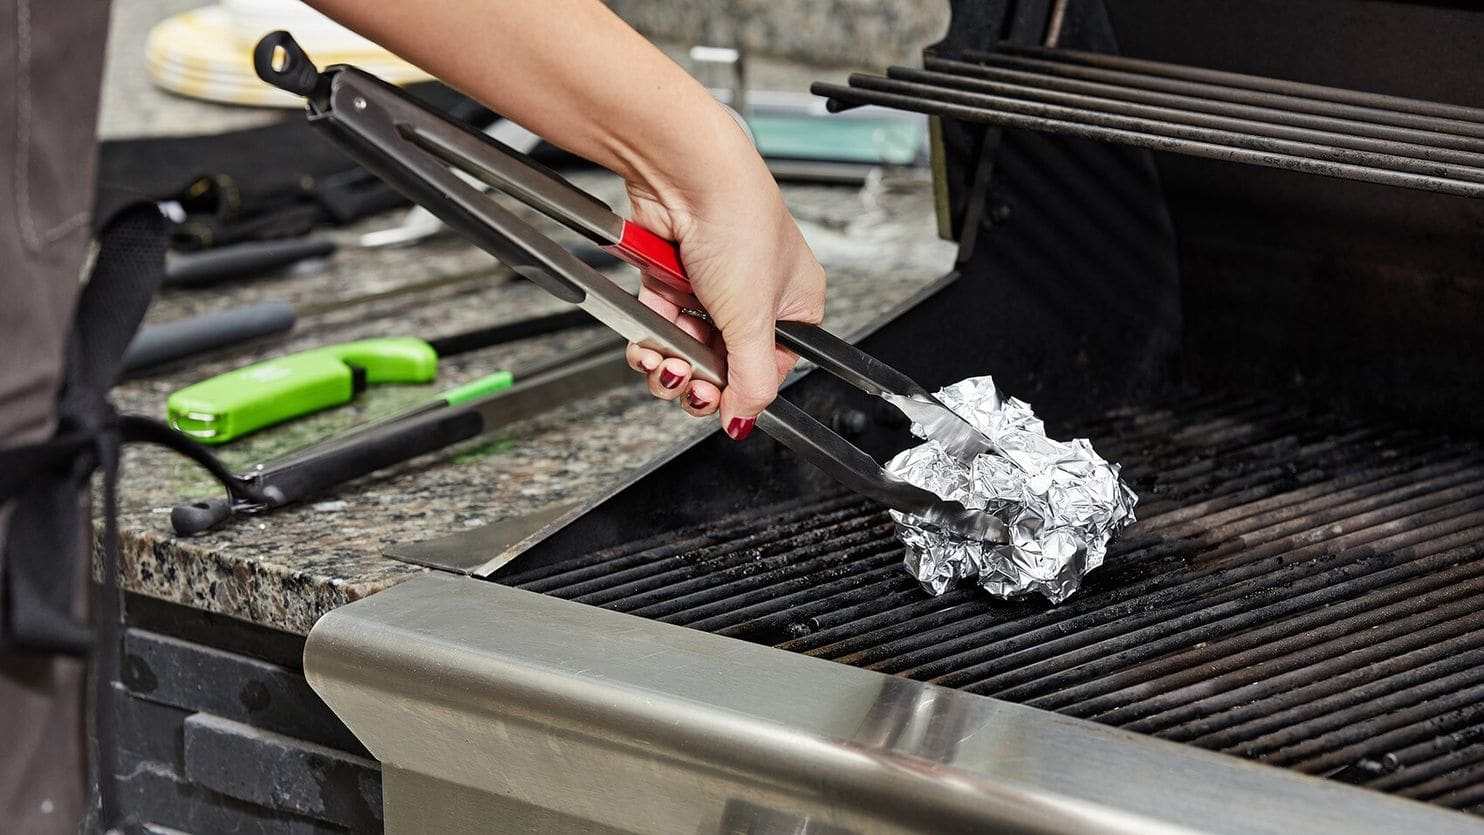 Cleaning your grill now will help you get the most out of it this